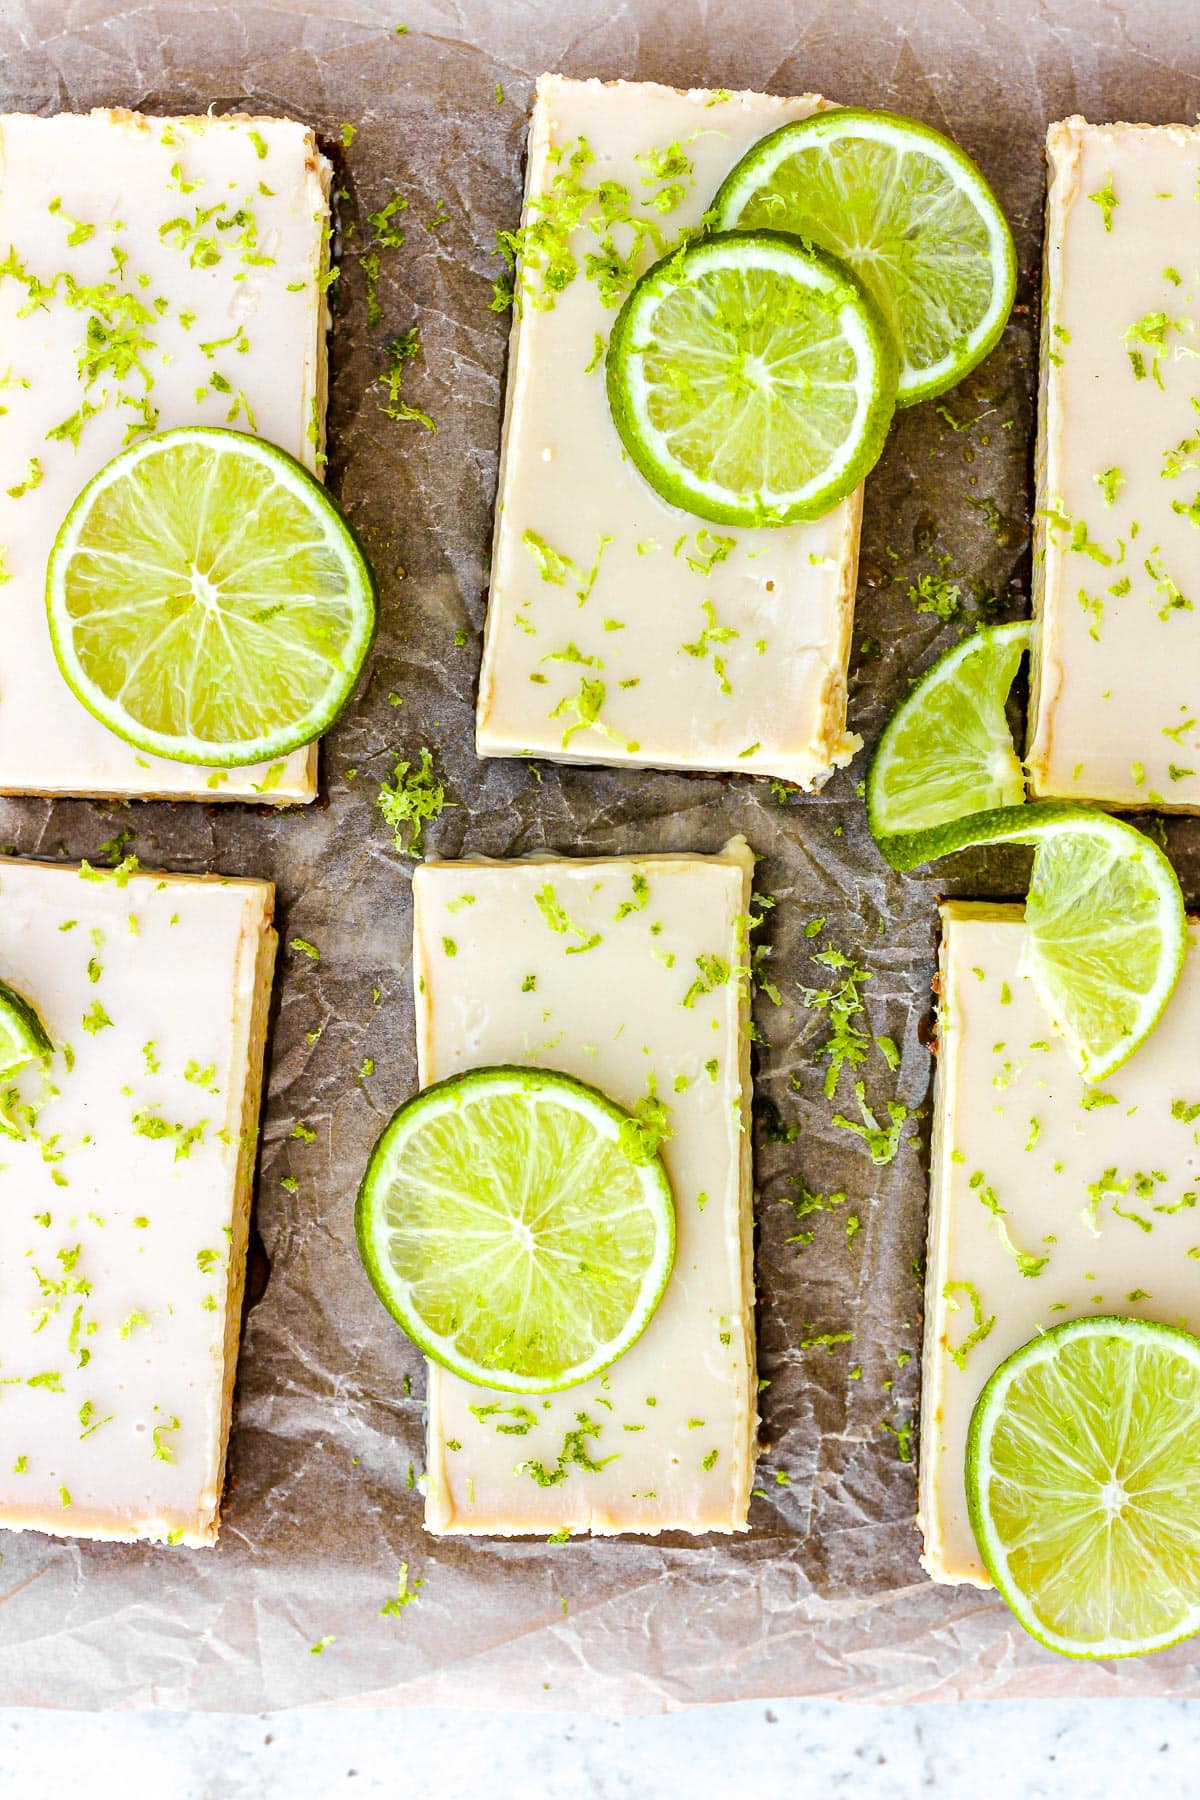 Key lime pie bars with fresh lime slices and lime zest on brown parchment paper.